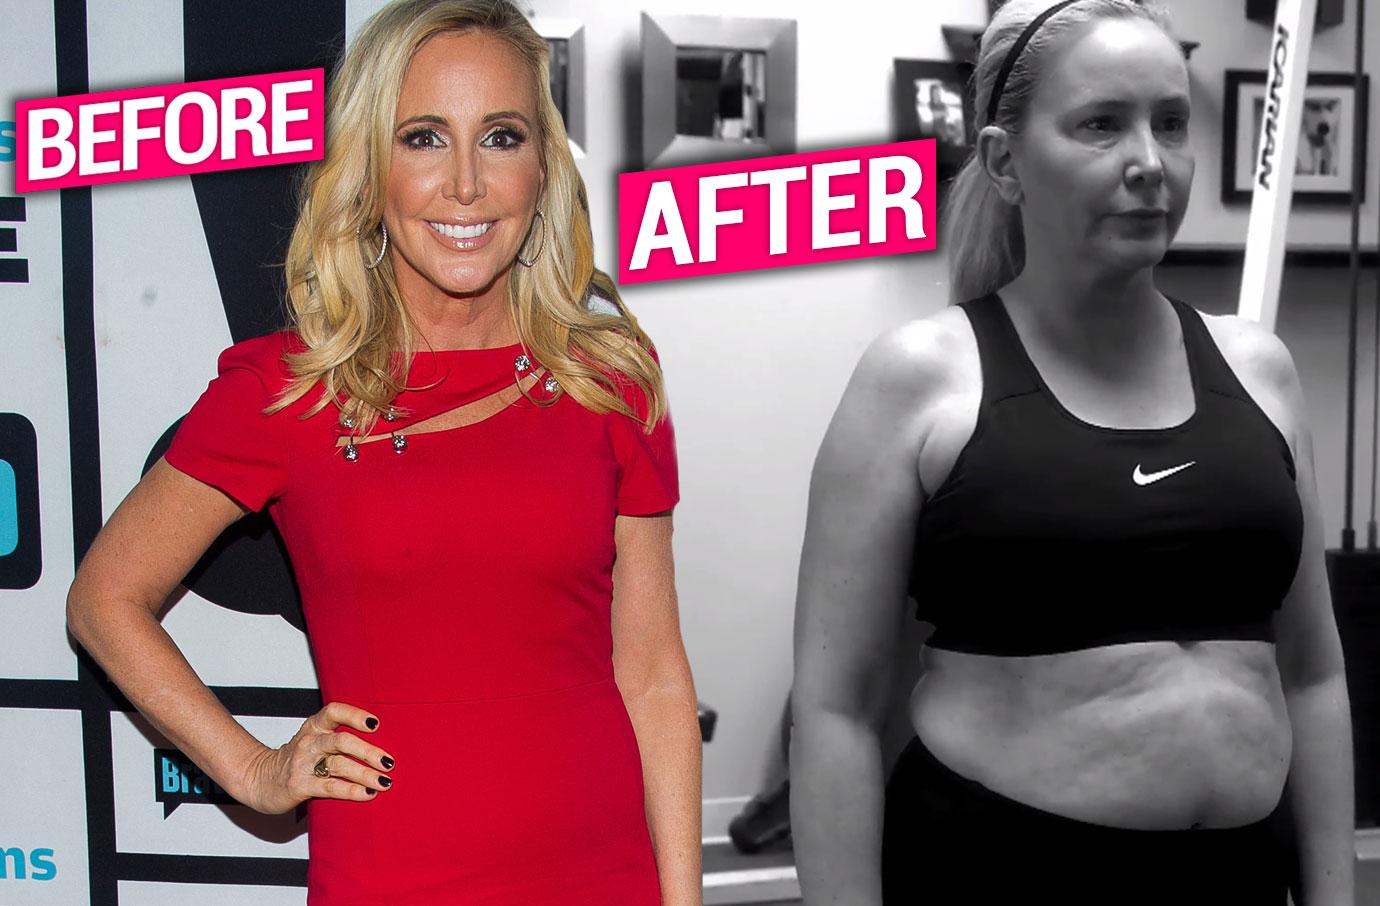 Rhoc Star Shannon Beador Extreme Weight Gain Revealed In Season 12